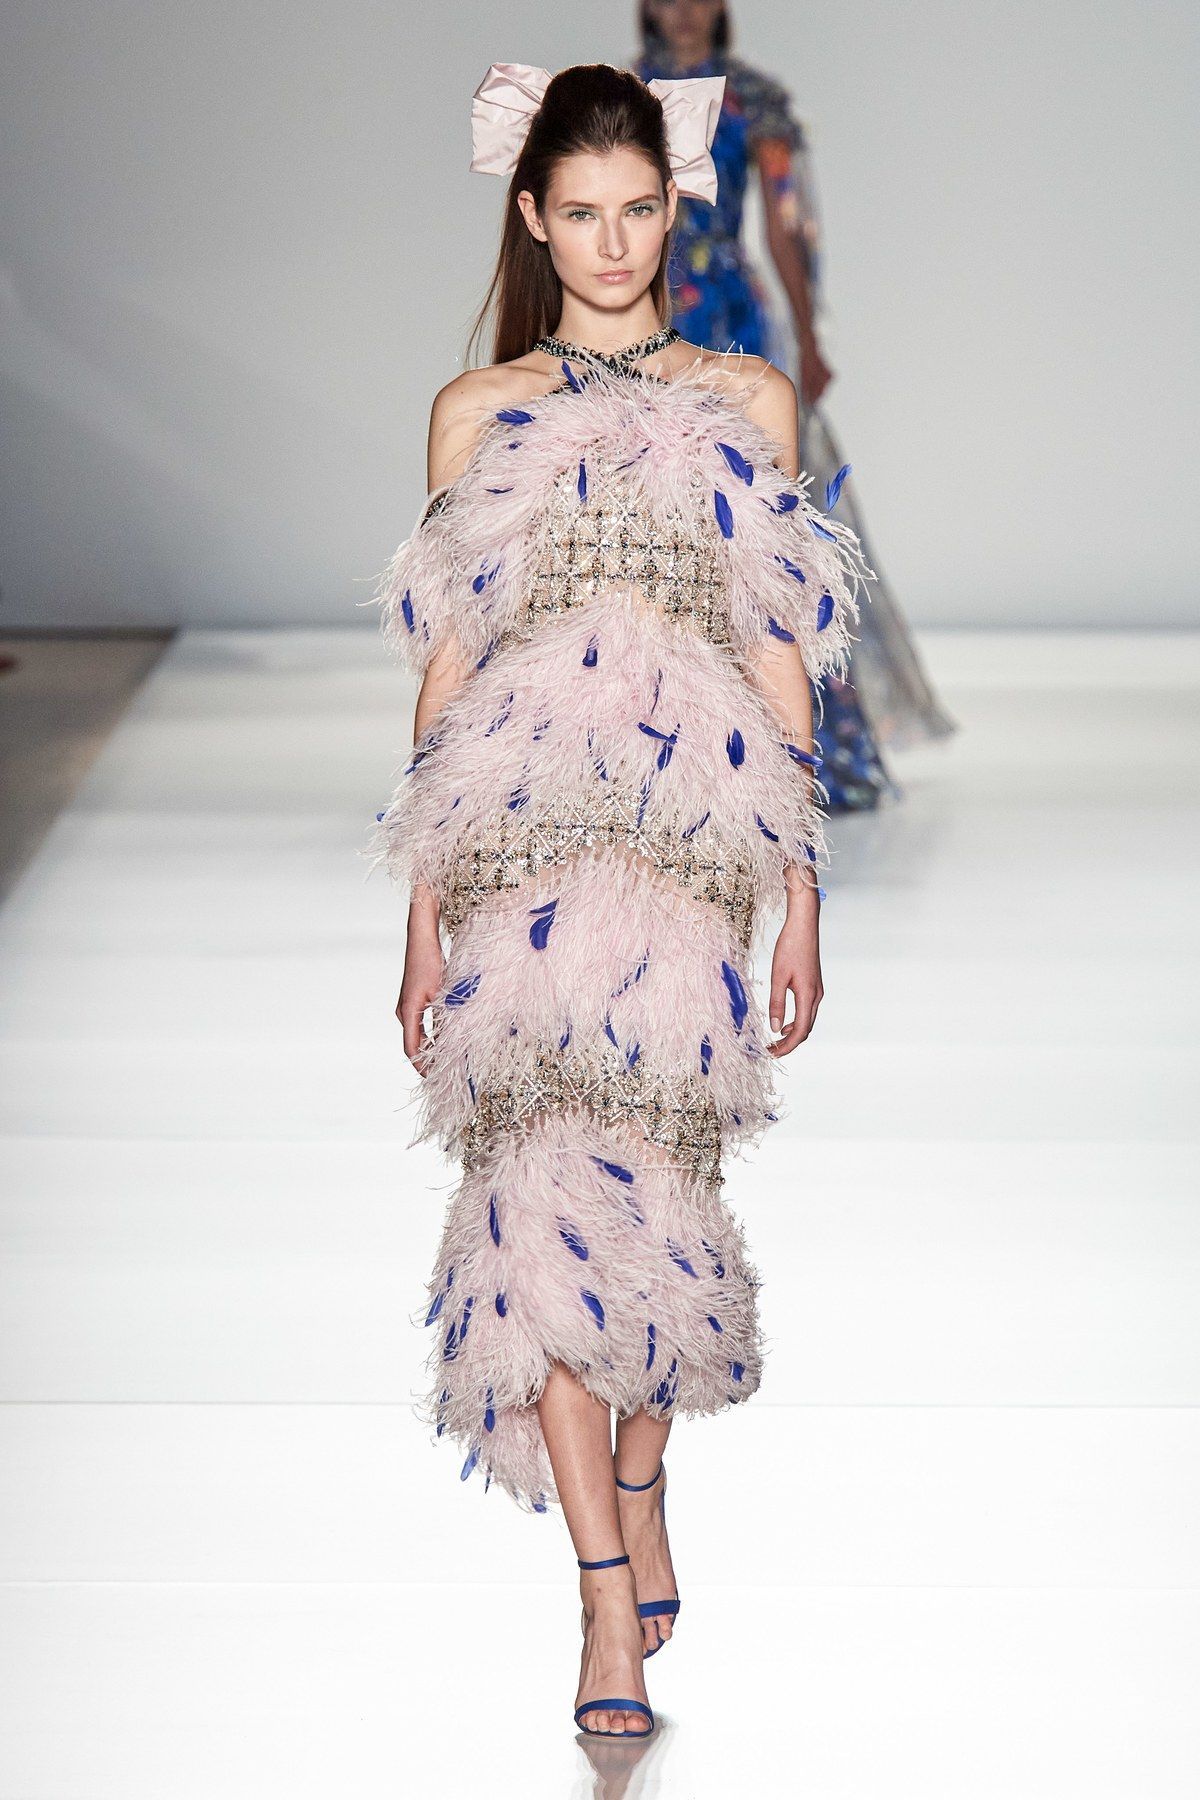 Ralph & Russo Spring 2020 Couture Fashion Show - Ralph & Russo Spring 2020 Couture Fashion Show -   16 beauty Fashion show ideas